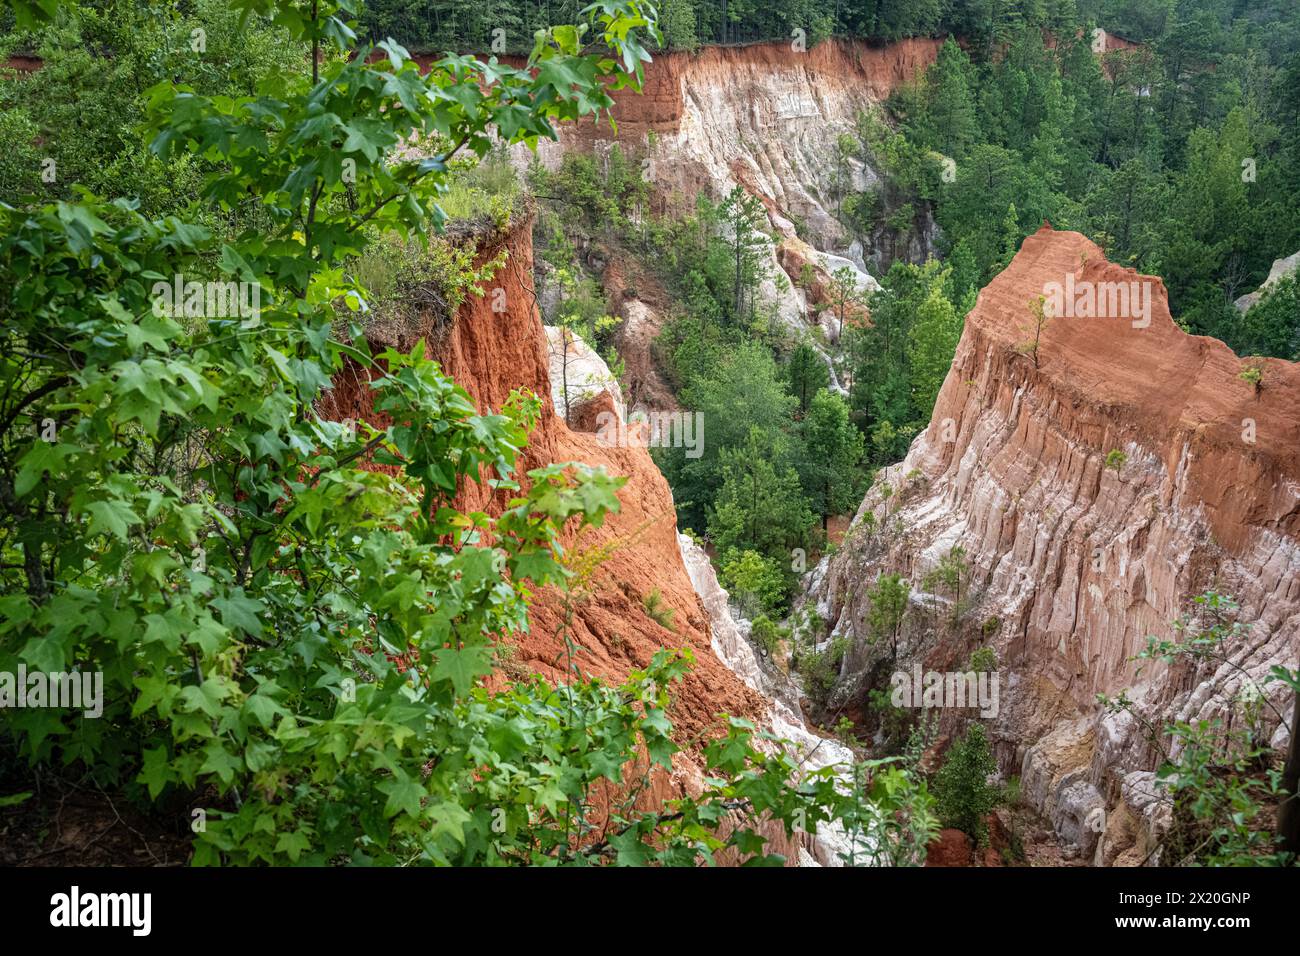 Beautiful variegated cliffs and summer foliage at Providence Canyon State Park in Lumpkin, Georgia. (USA) Stock Photo